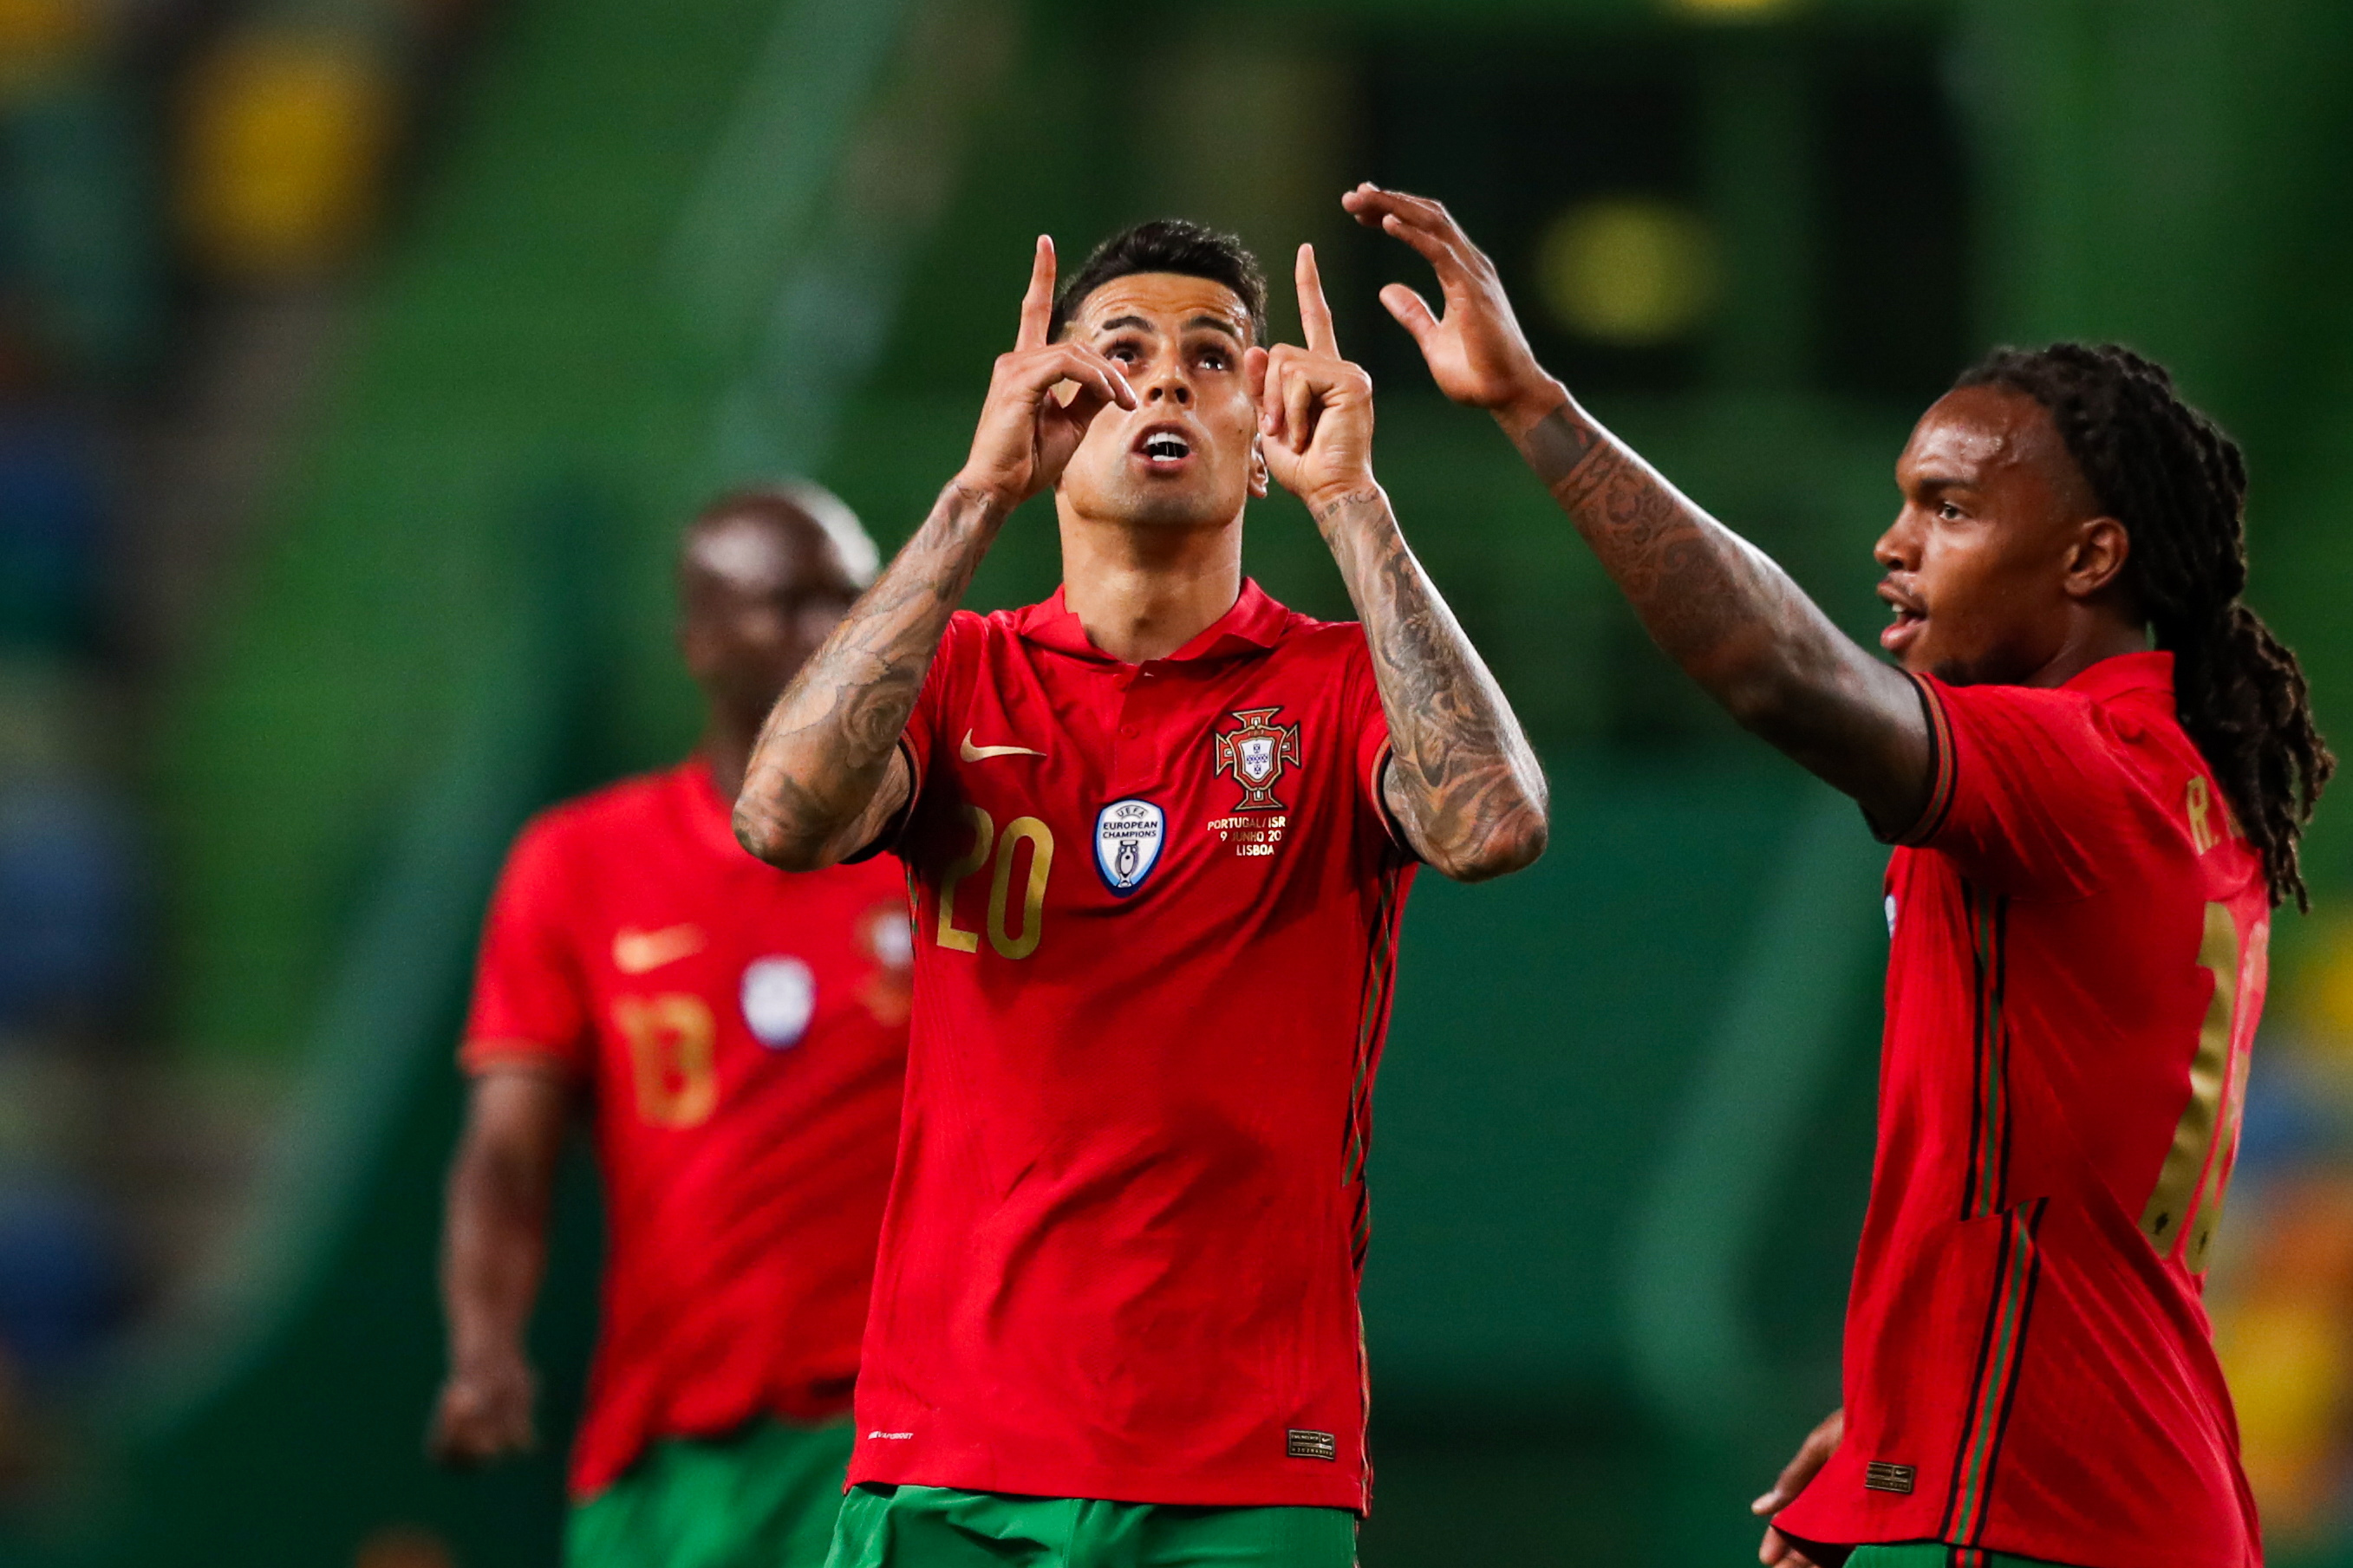 Euro 2020 | Joao Cancelo replaced by Diogo Dalot in Portugal’s squad after testing positive for COVID-19